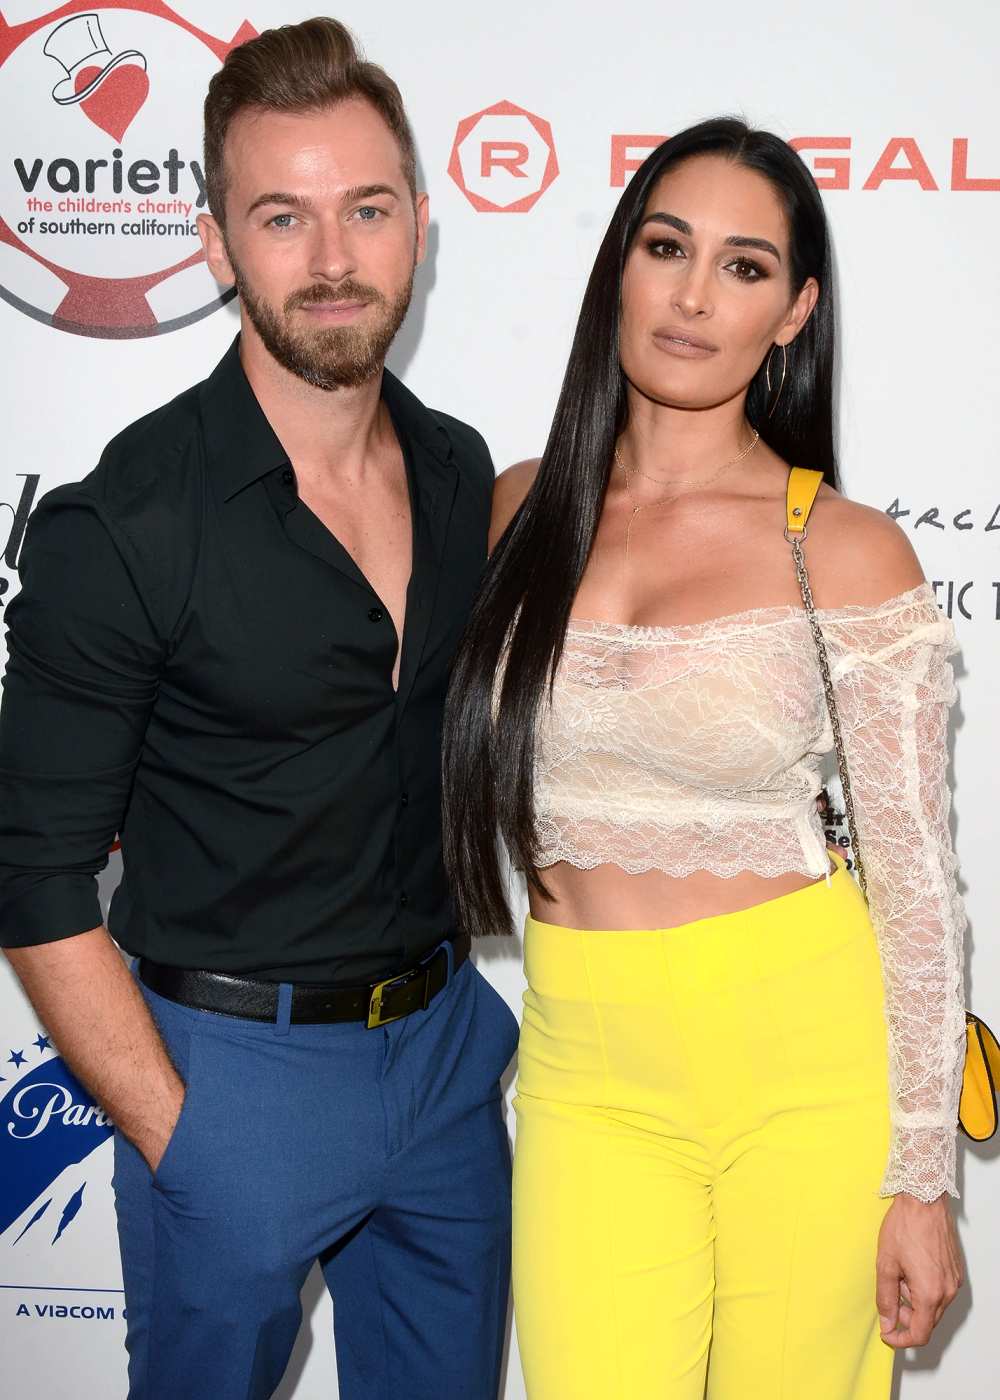 Nikki Bella Has No Help Taking Care of Baby as Artem Chigvintsev Returns to ‘Dancing With the Stars’